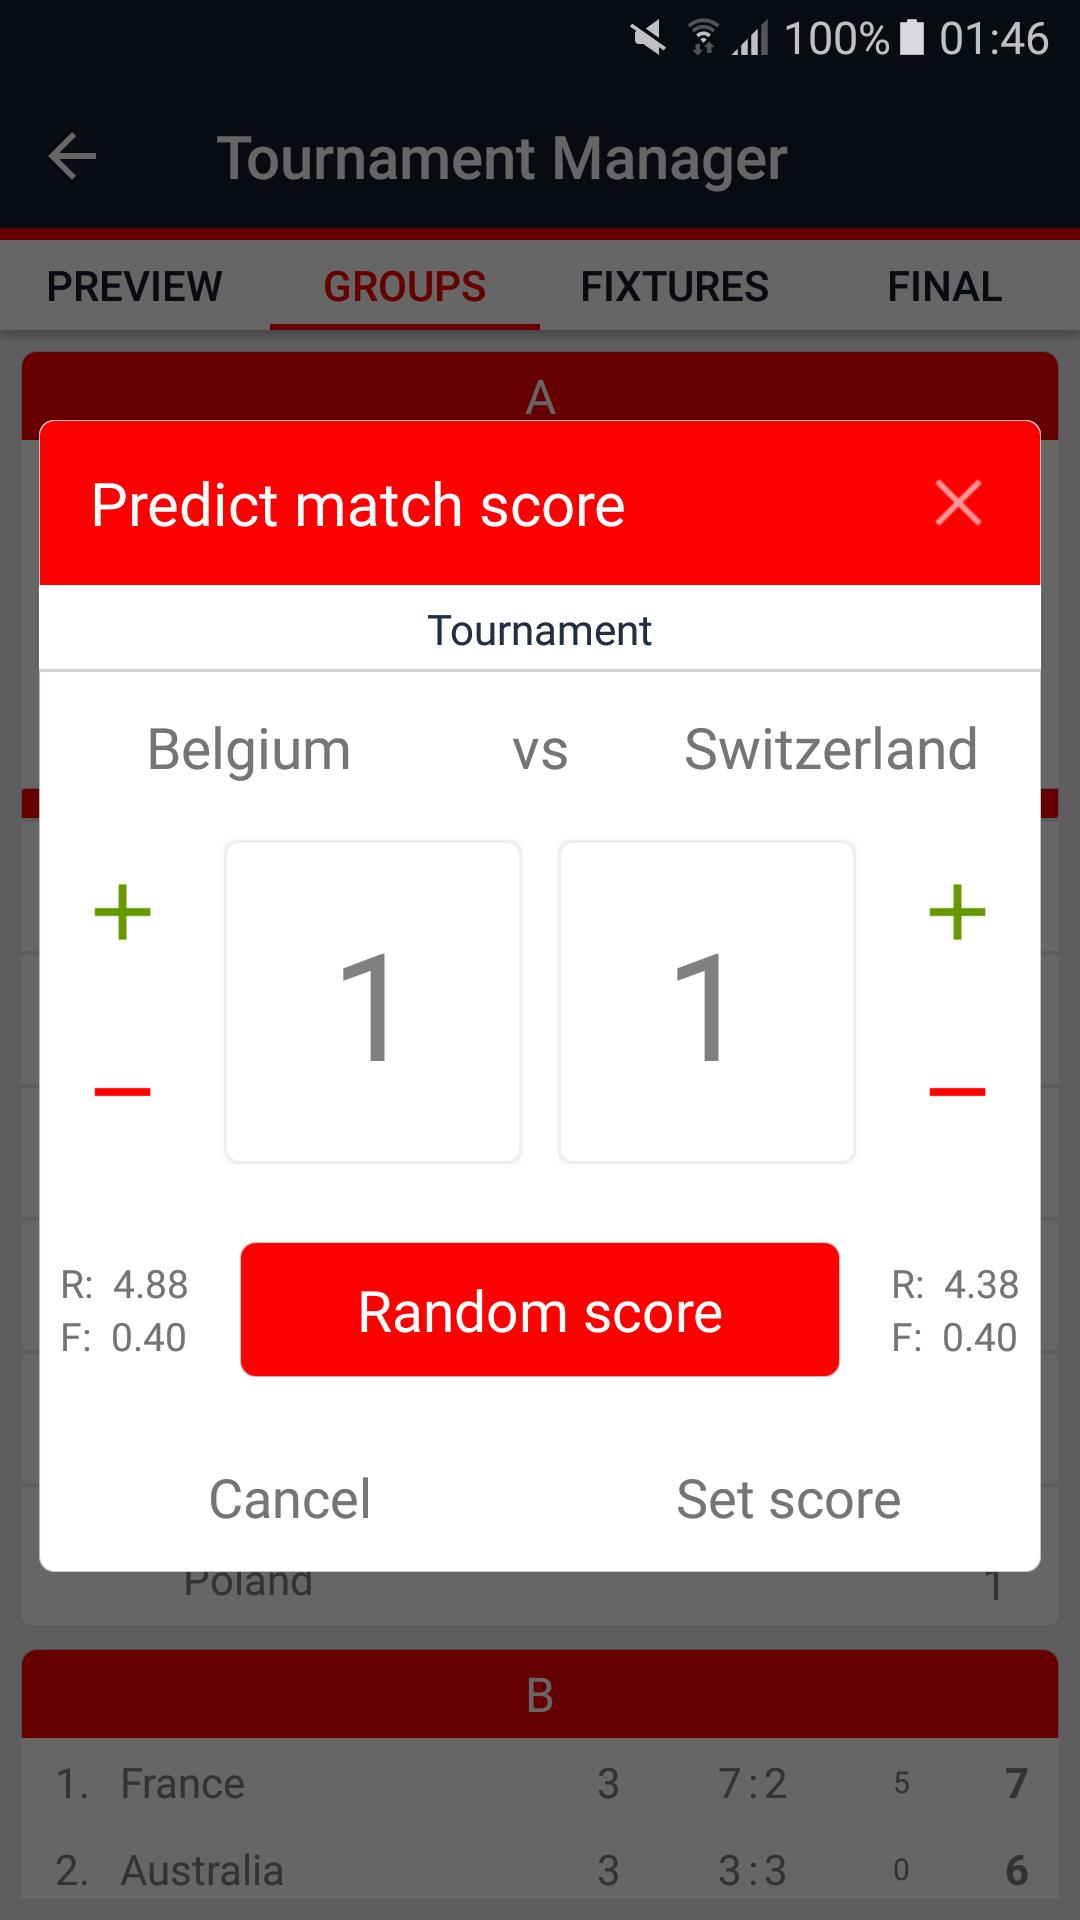 Download Tournament Manager android on PC